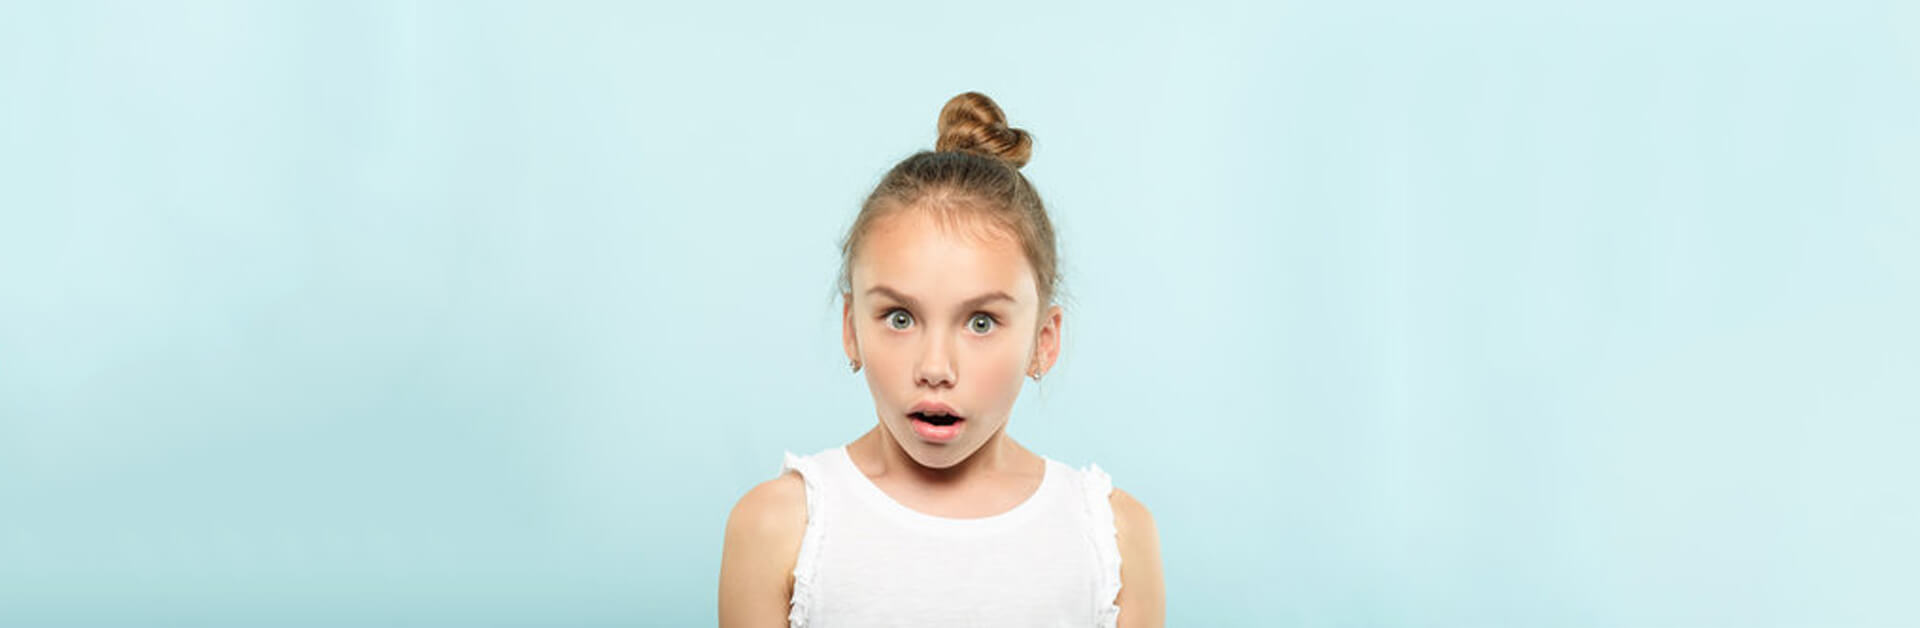 3 METHODS TO TEST IF YOUR CHILD IS HABITUALLY MOUTH BREATHING